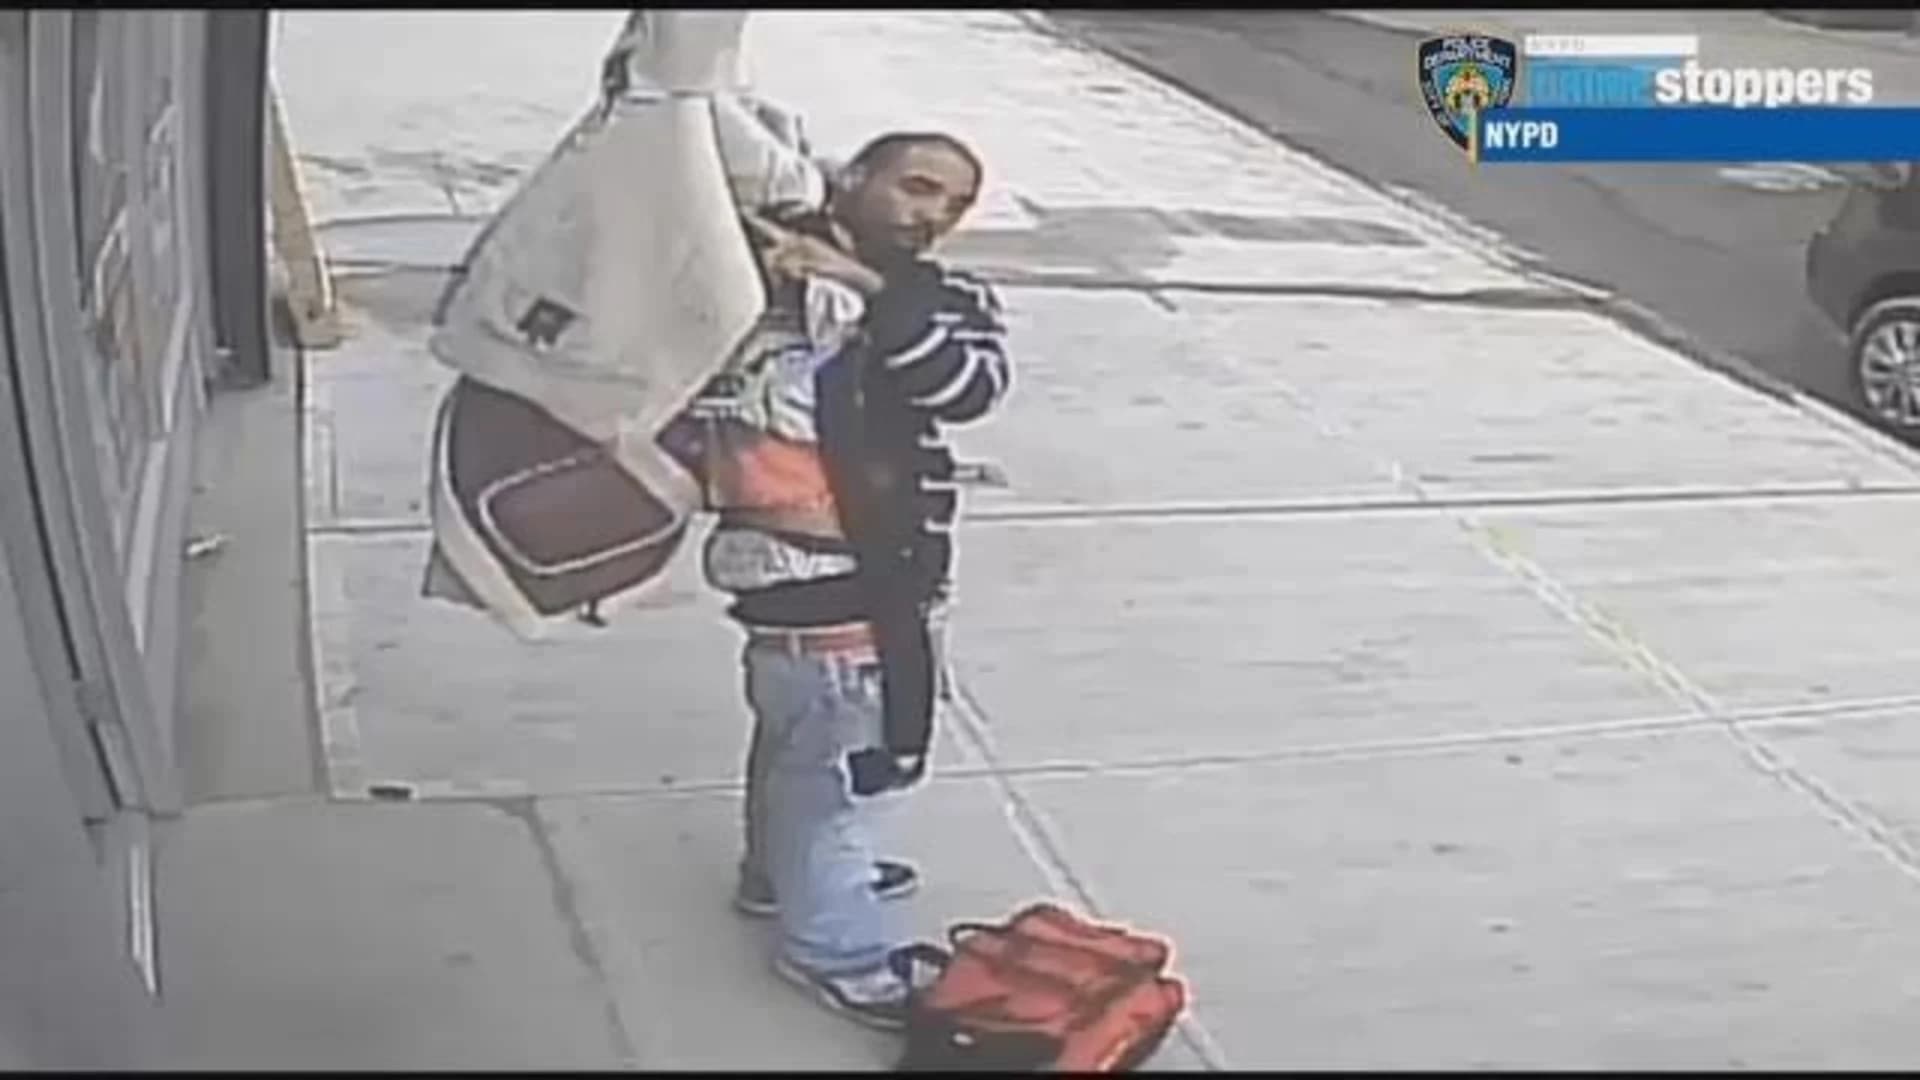 Police: Man followed off Bx11 bus, attacked and robbed on Jennings St.